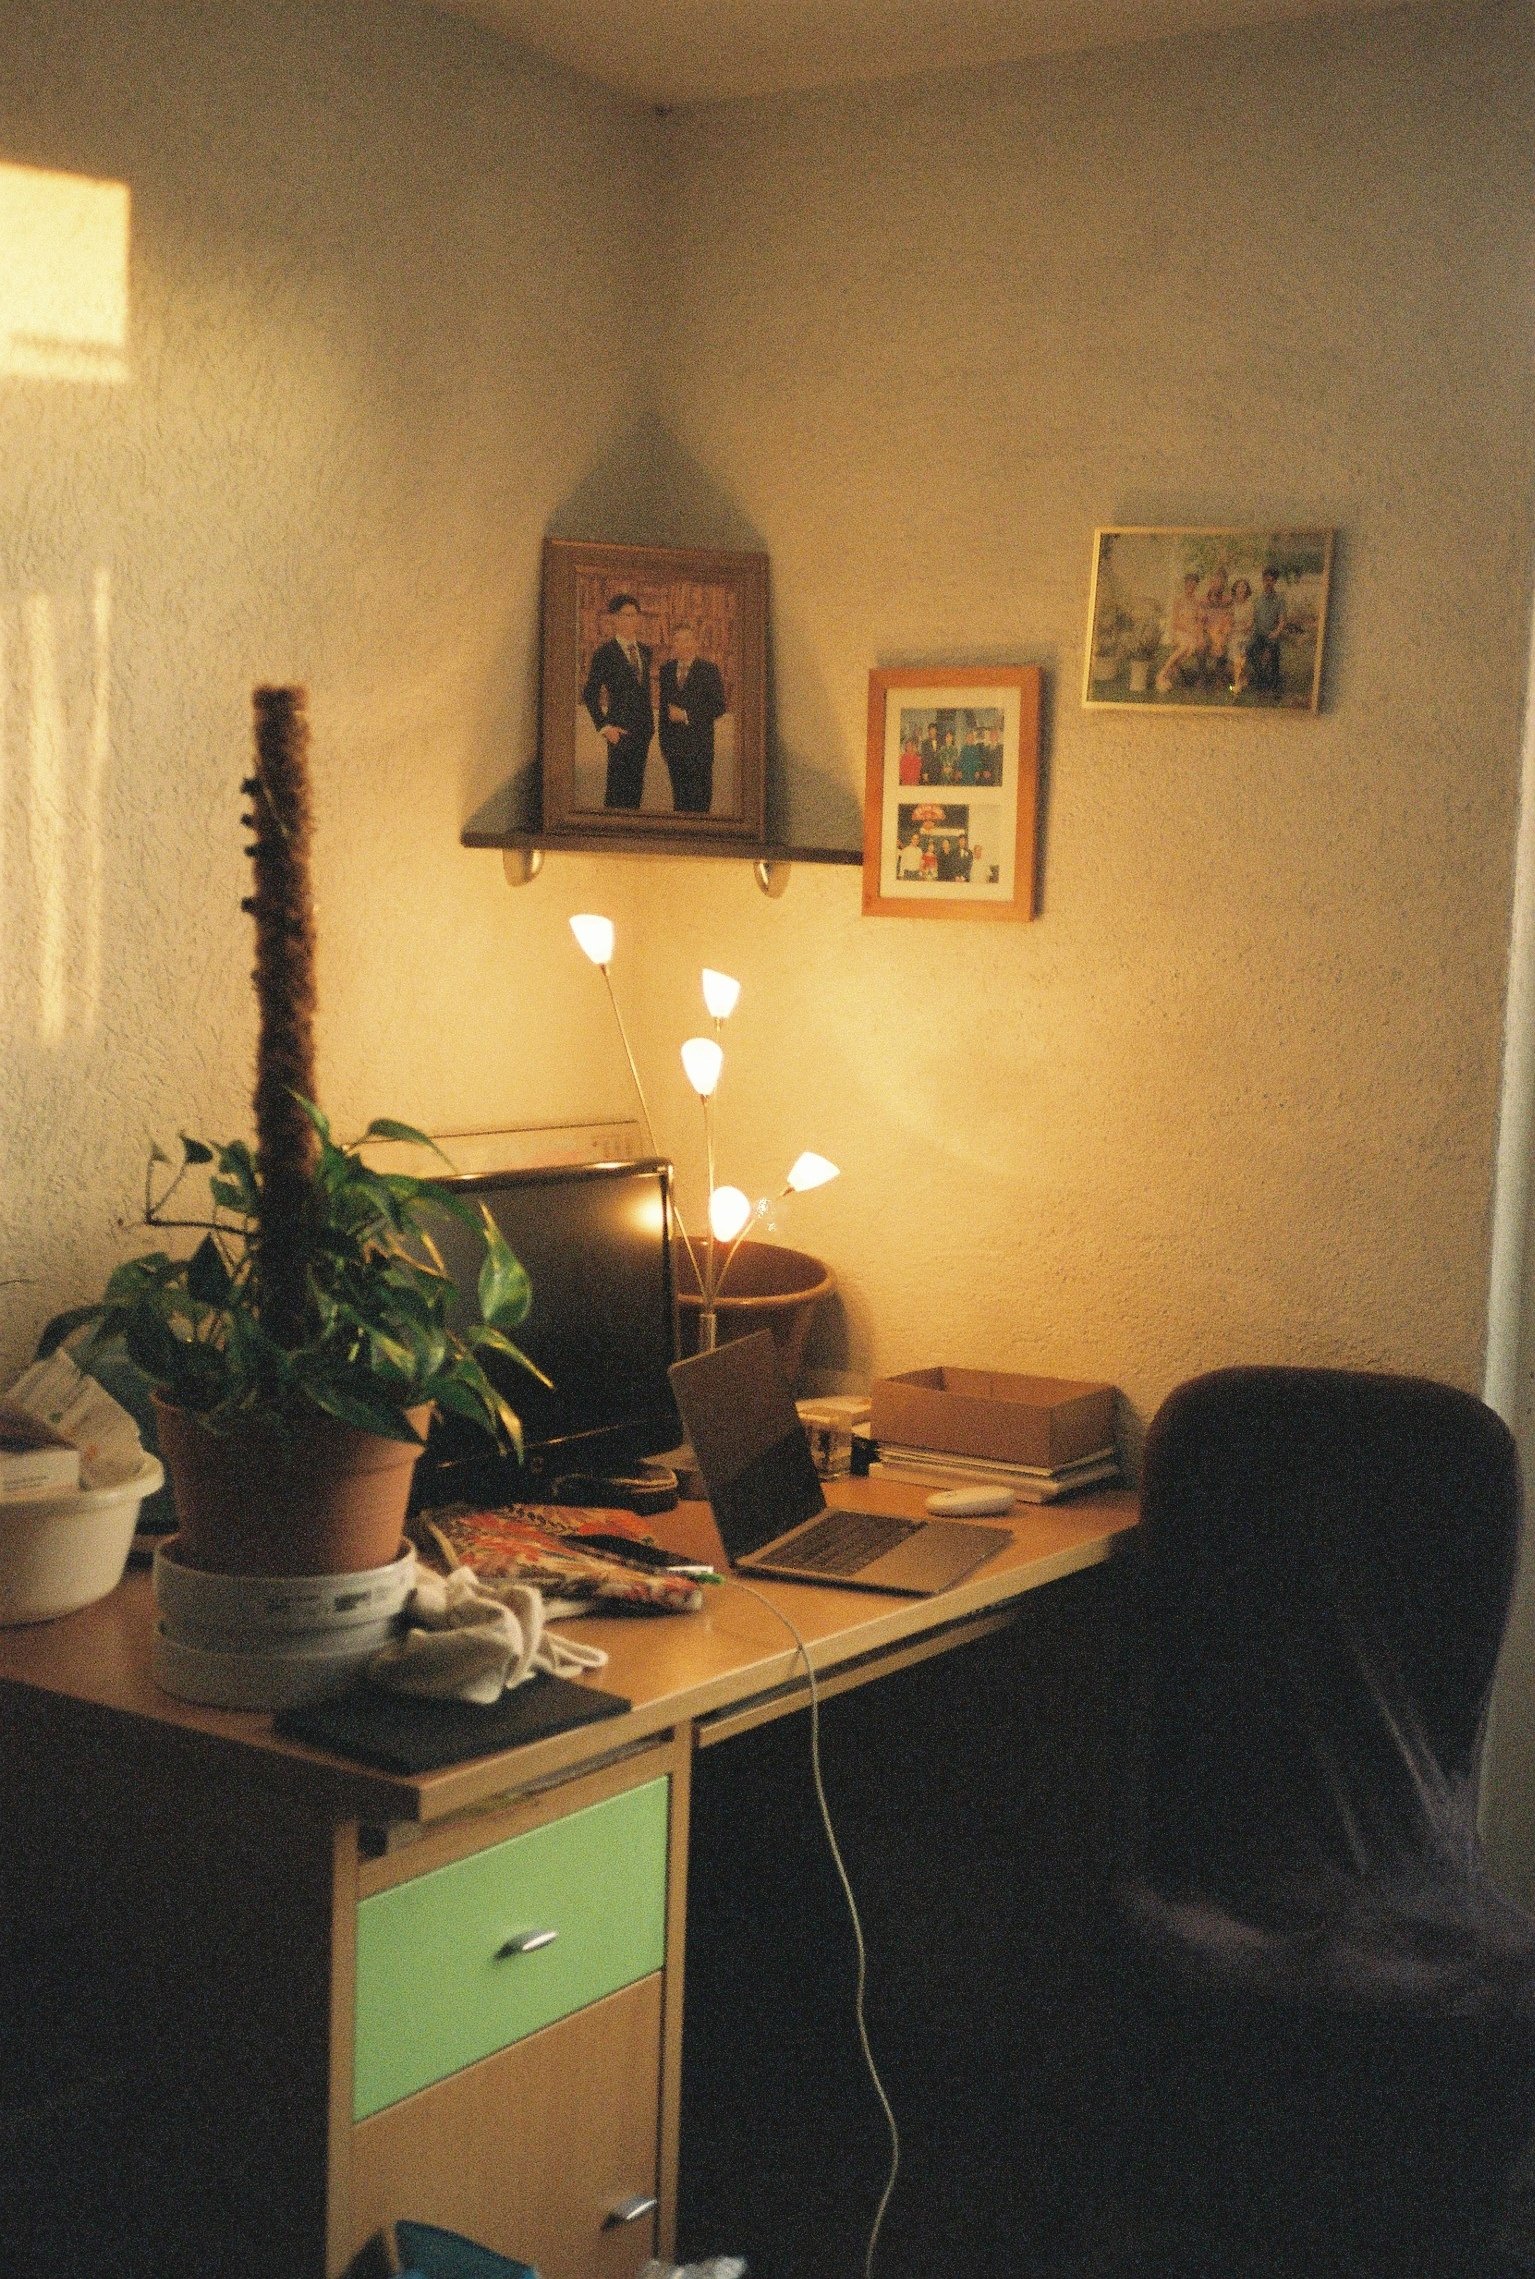 A desk with computer screens and a plant, three family photos on the wall above it.